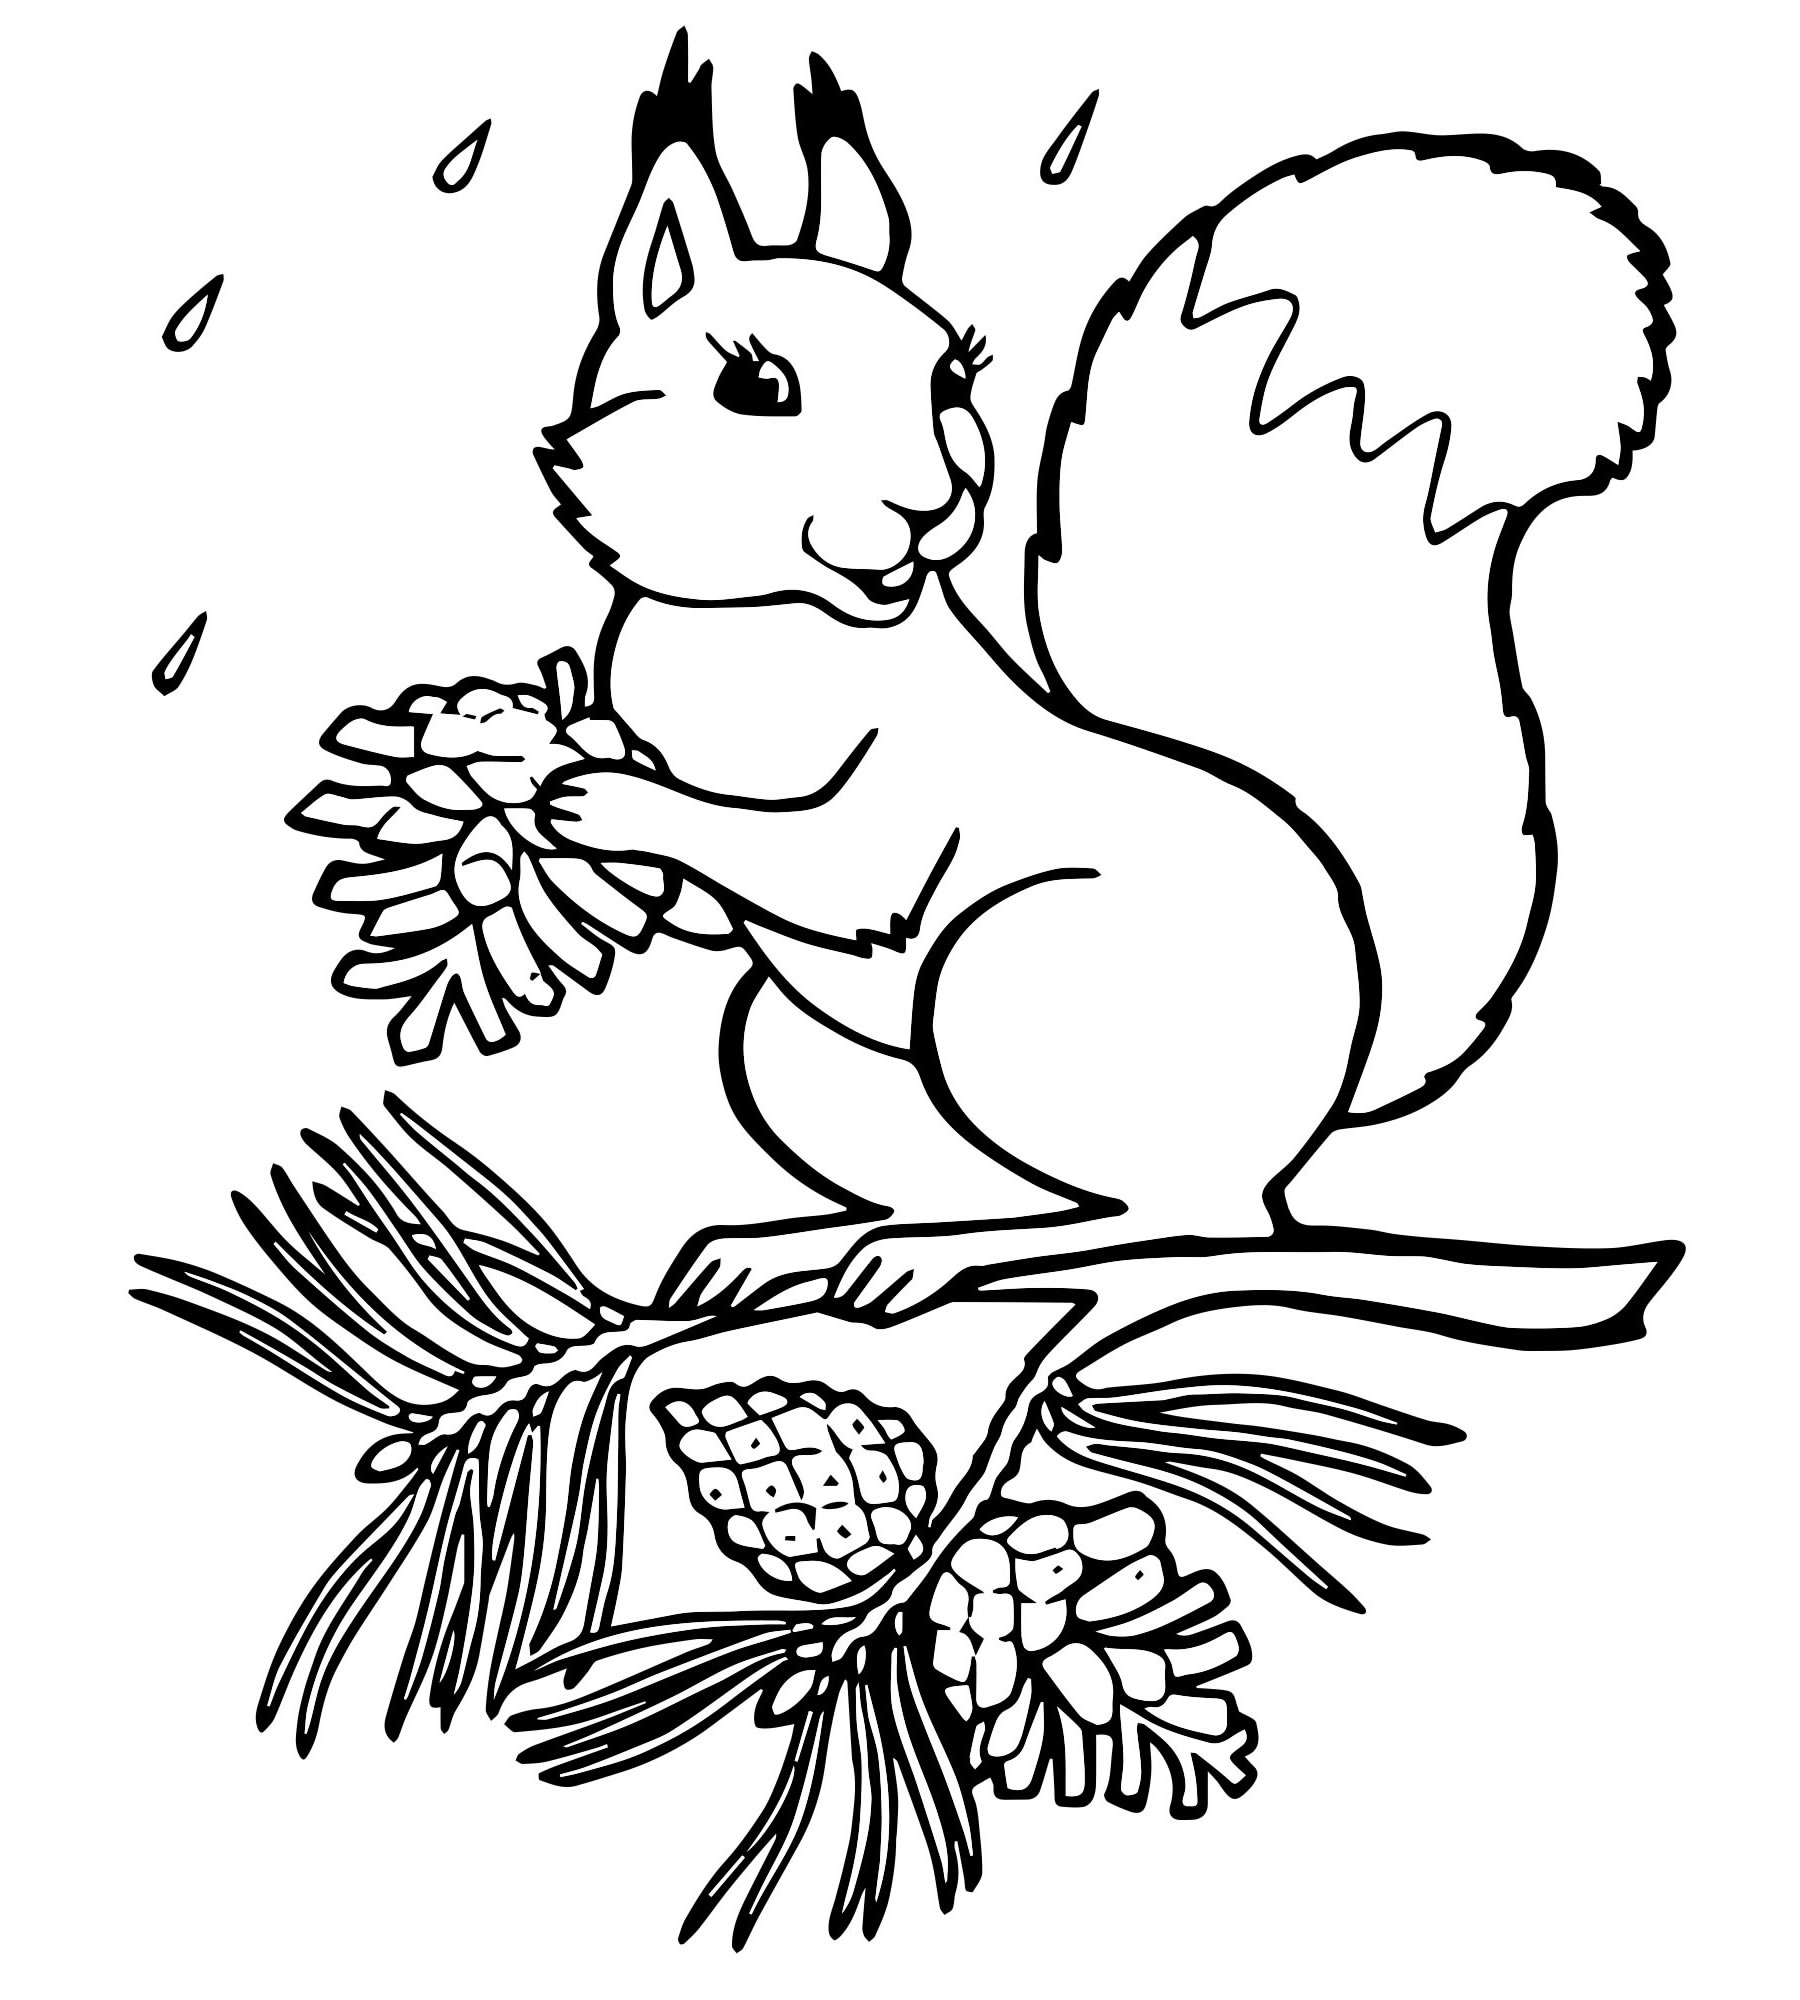 Squirrel for children 6 7 years old #8